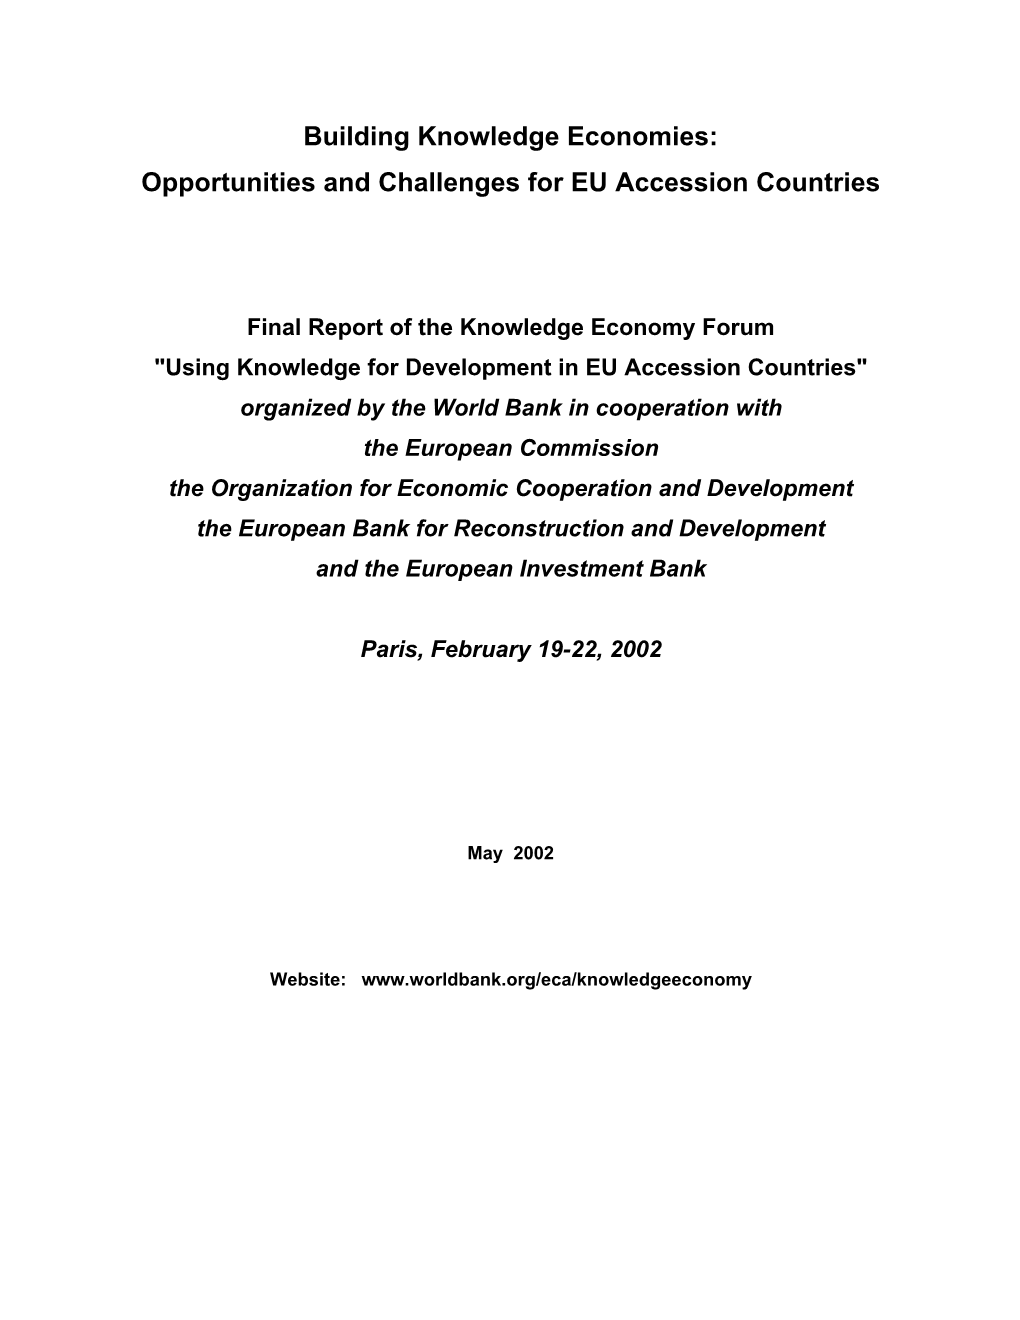 Building Knowledge Economies: Opportunities and Challenges for EU Accession Countries